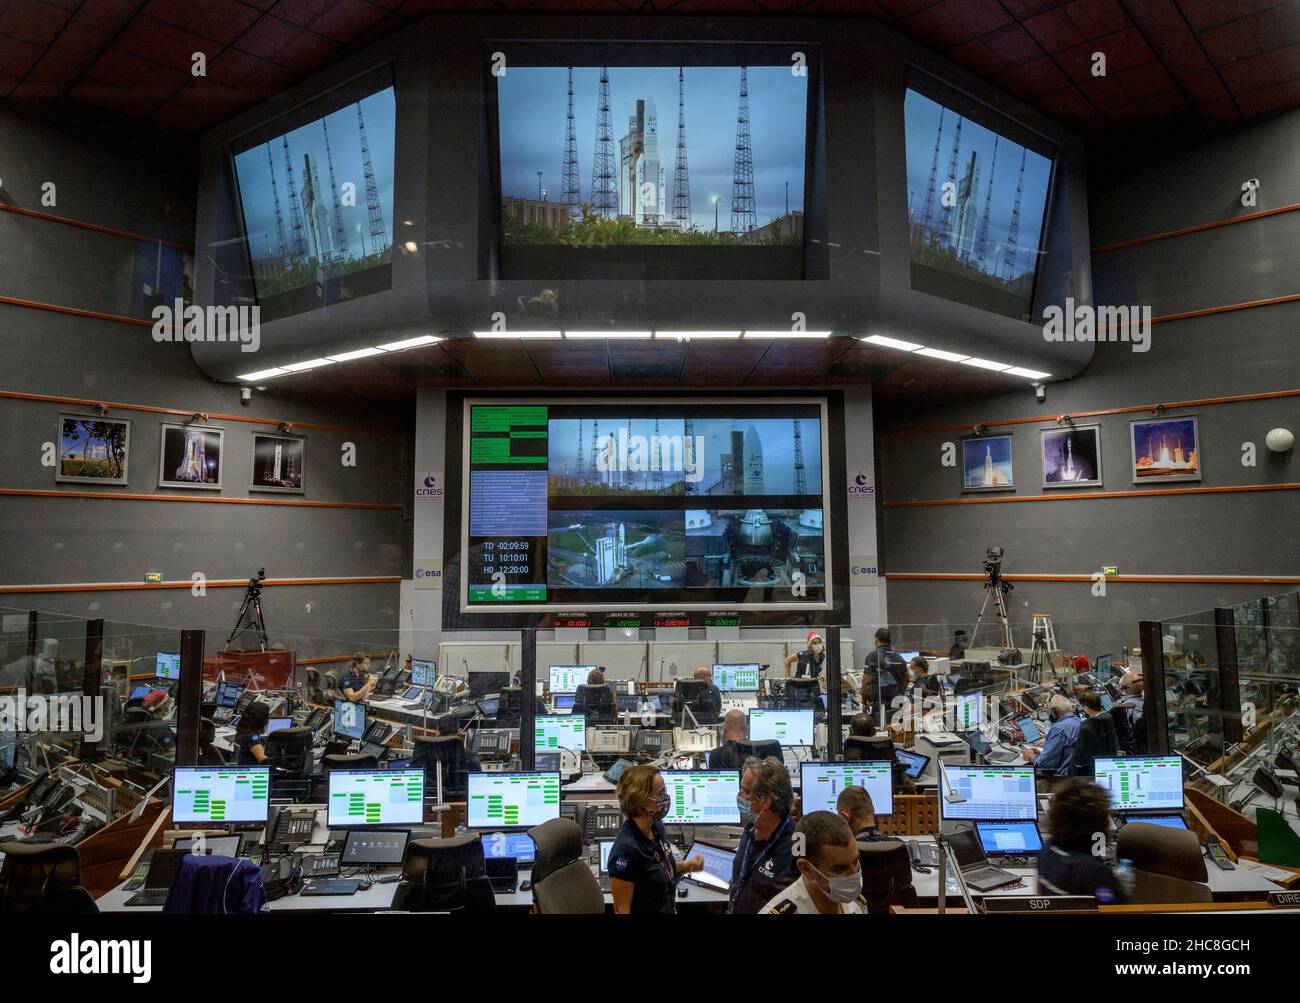 Launch teams monitor the countdown to the launch of Arianespace's Ariane 5 rocket carrying NASA's James Webb Space Telescope, Saturday, Dec. 25, 2021, in the Jupiter Center at the Guiana Space Center in Kourou, French Guiana. The James Webb Space Telescope (sometimes called JWST or Webb) is a large infrared telescope with a 21.3 foot (6.5 meter) primary mirror. The observatory will study every phase of cosmic history-from within our solar system to the most distant observable galaxies in the early universe.Mandatory Credit: Bill Ingalls/NASA via CNP /MediaPunch Stock Photo